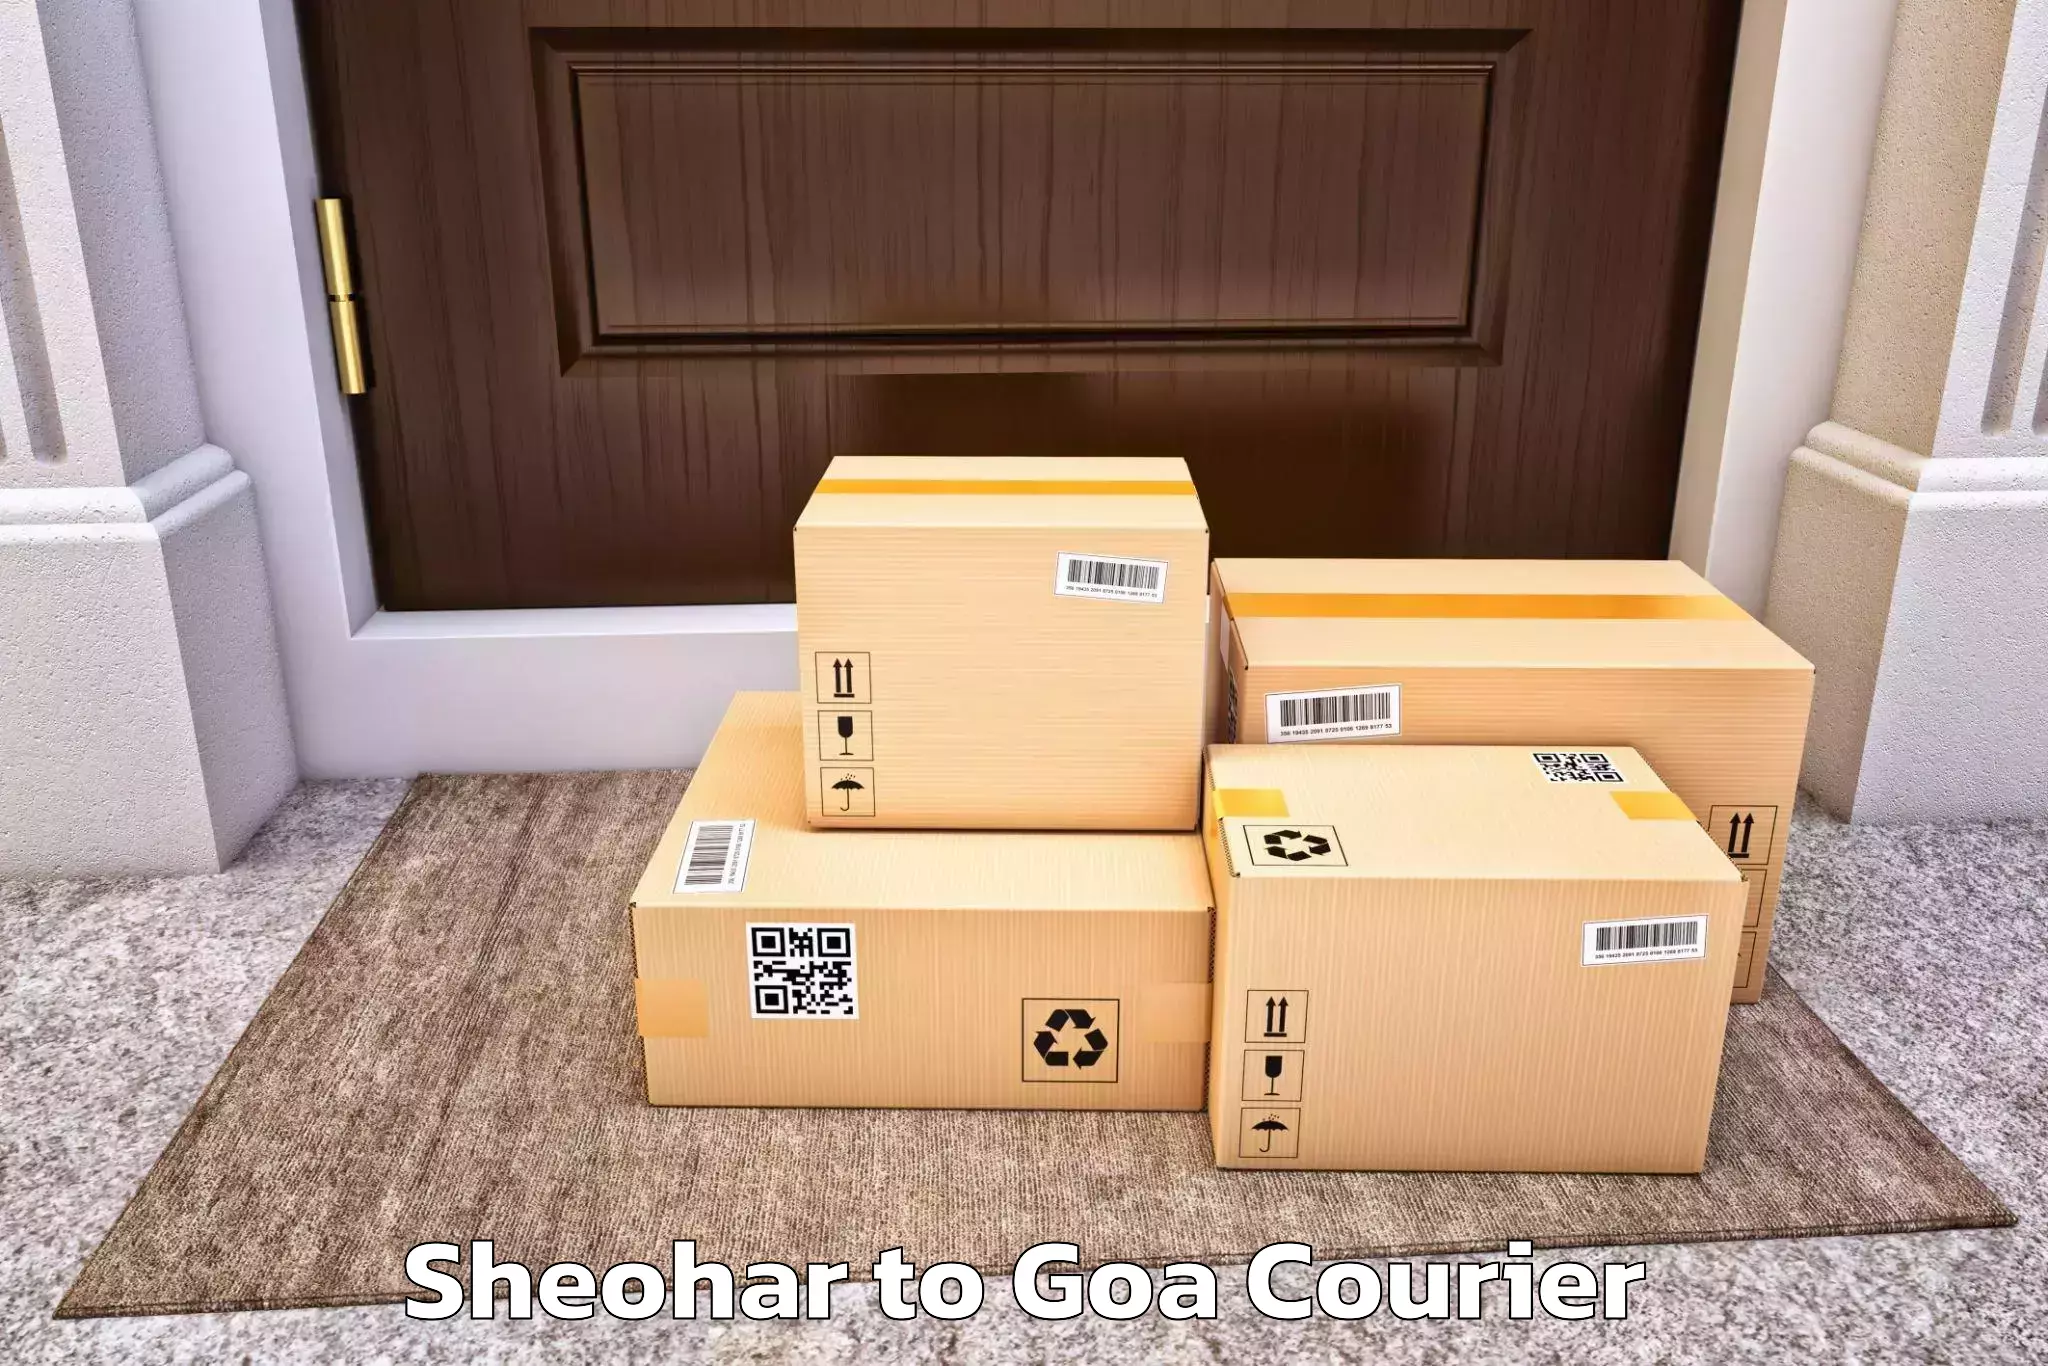 Furniture moving experts Sheohar to Goa